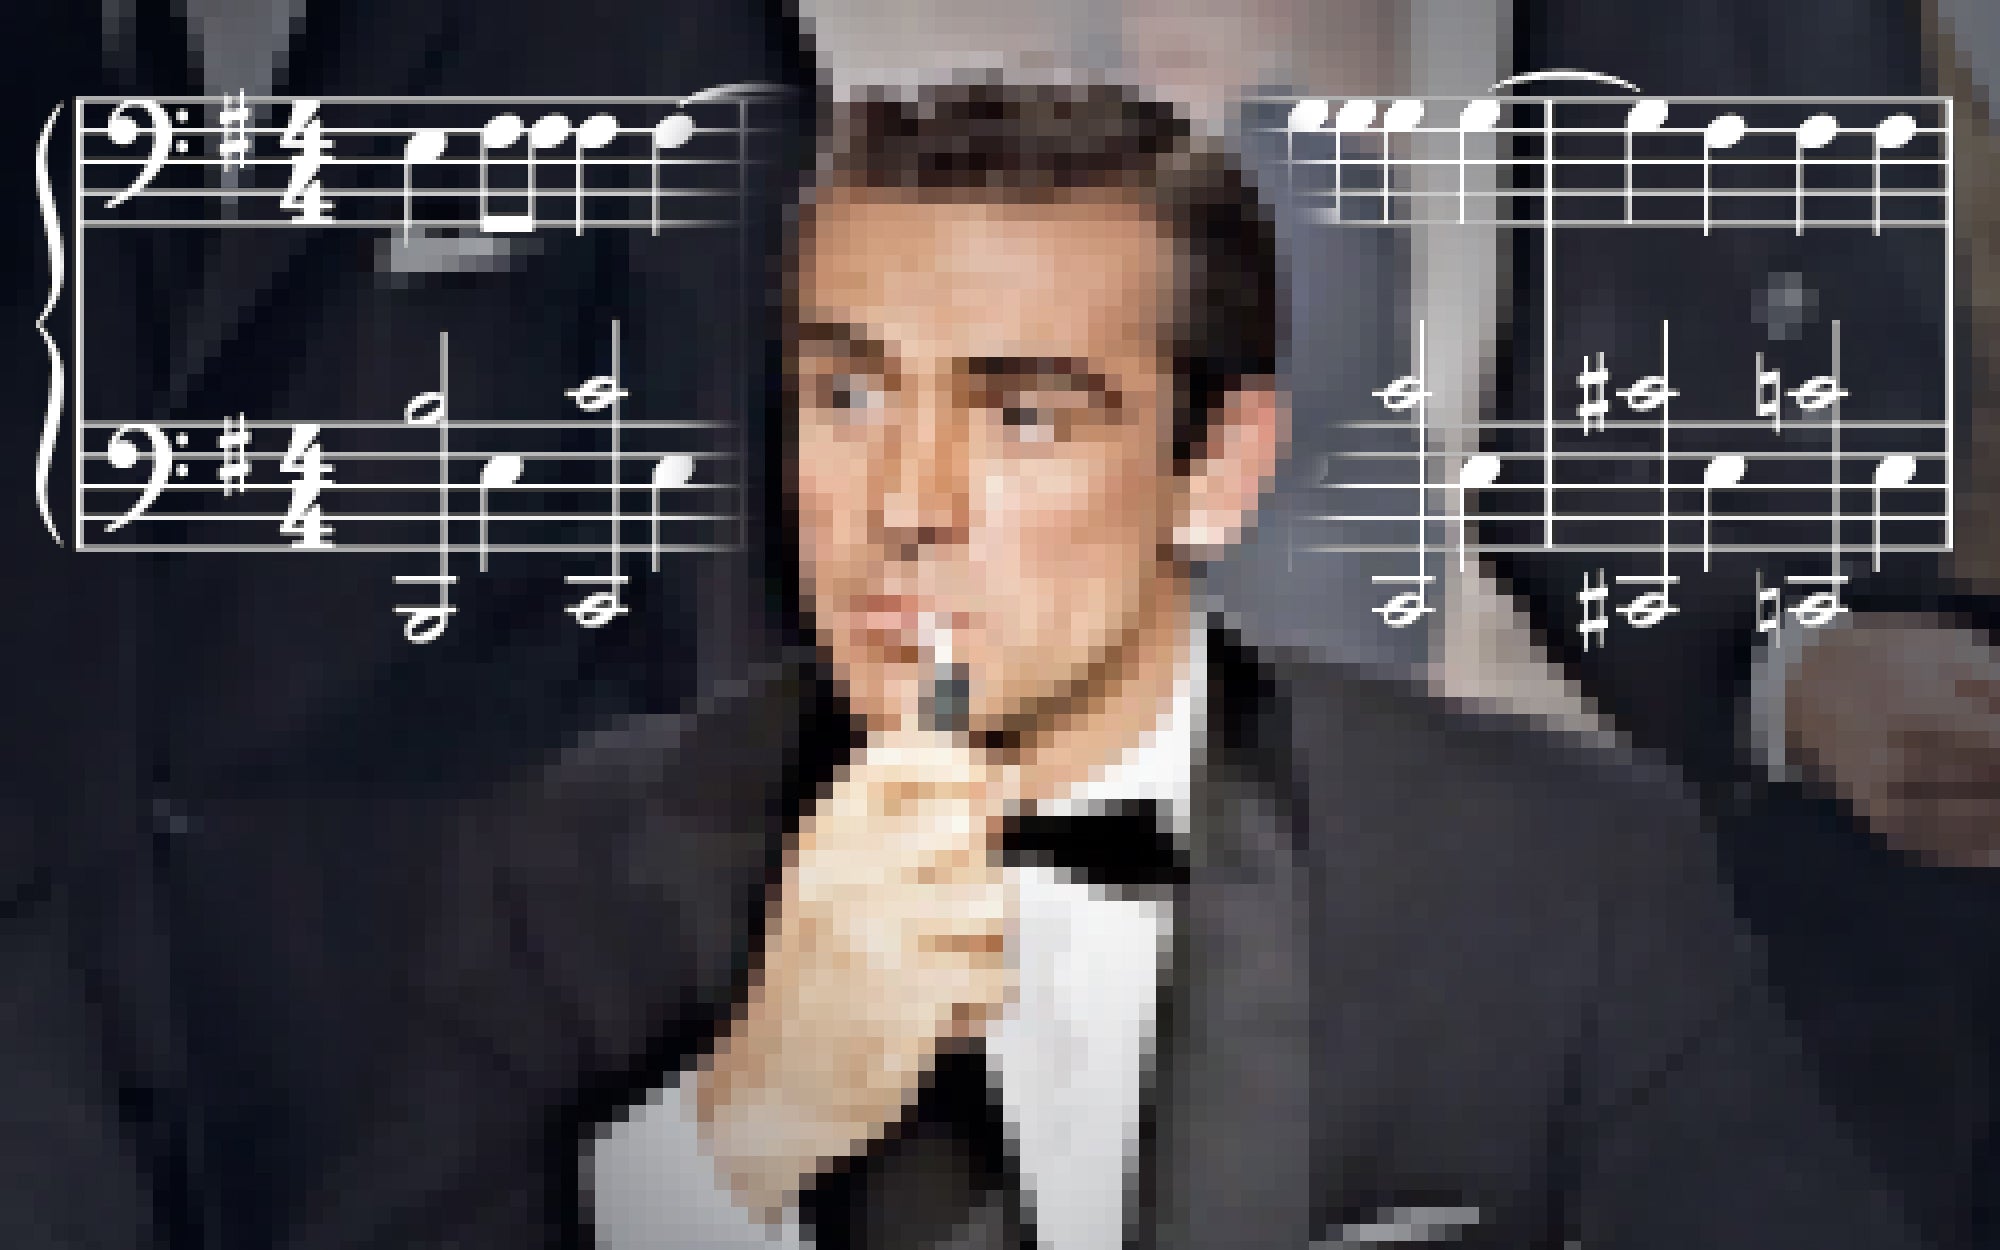 Chase Bethea looks at the 007 chord progression in video games